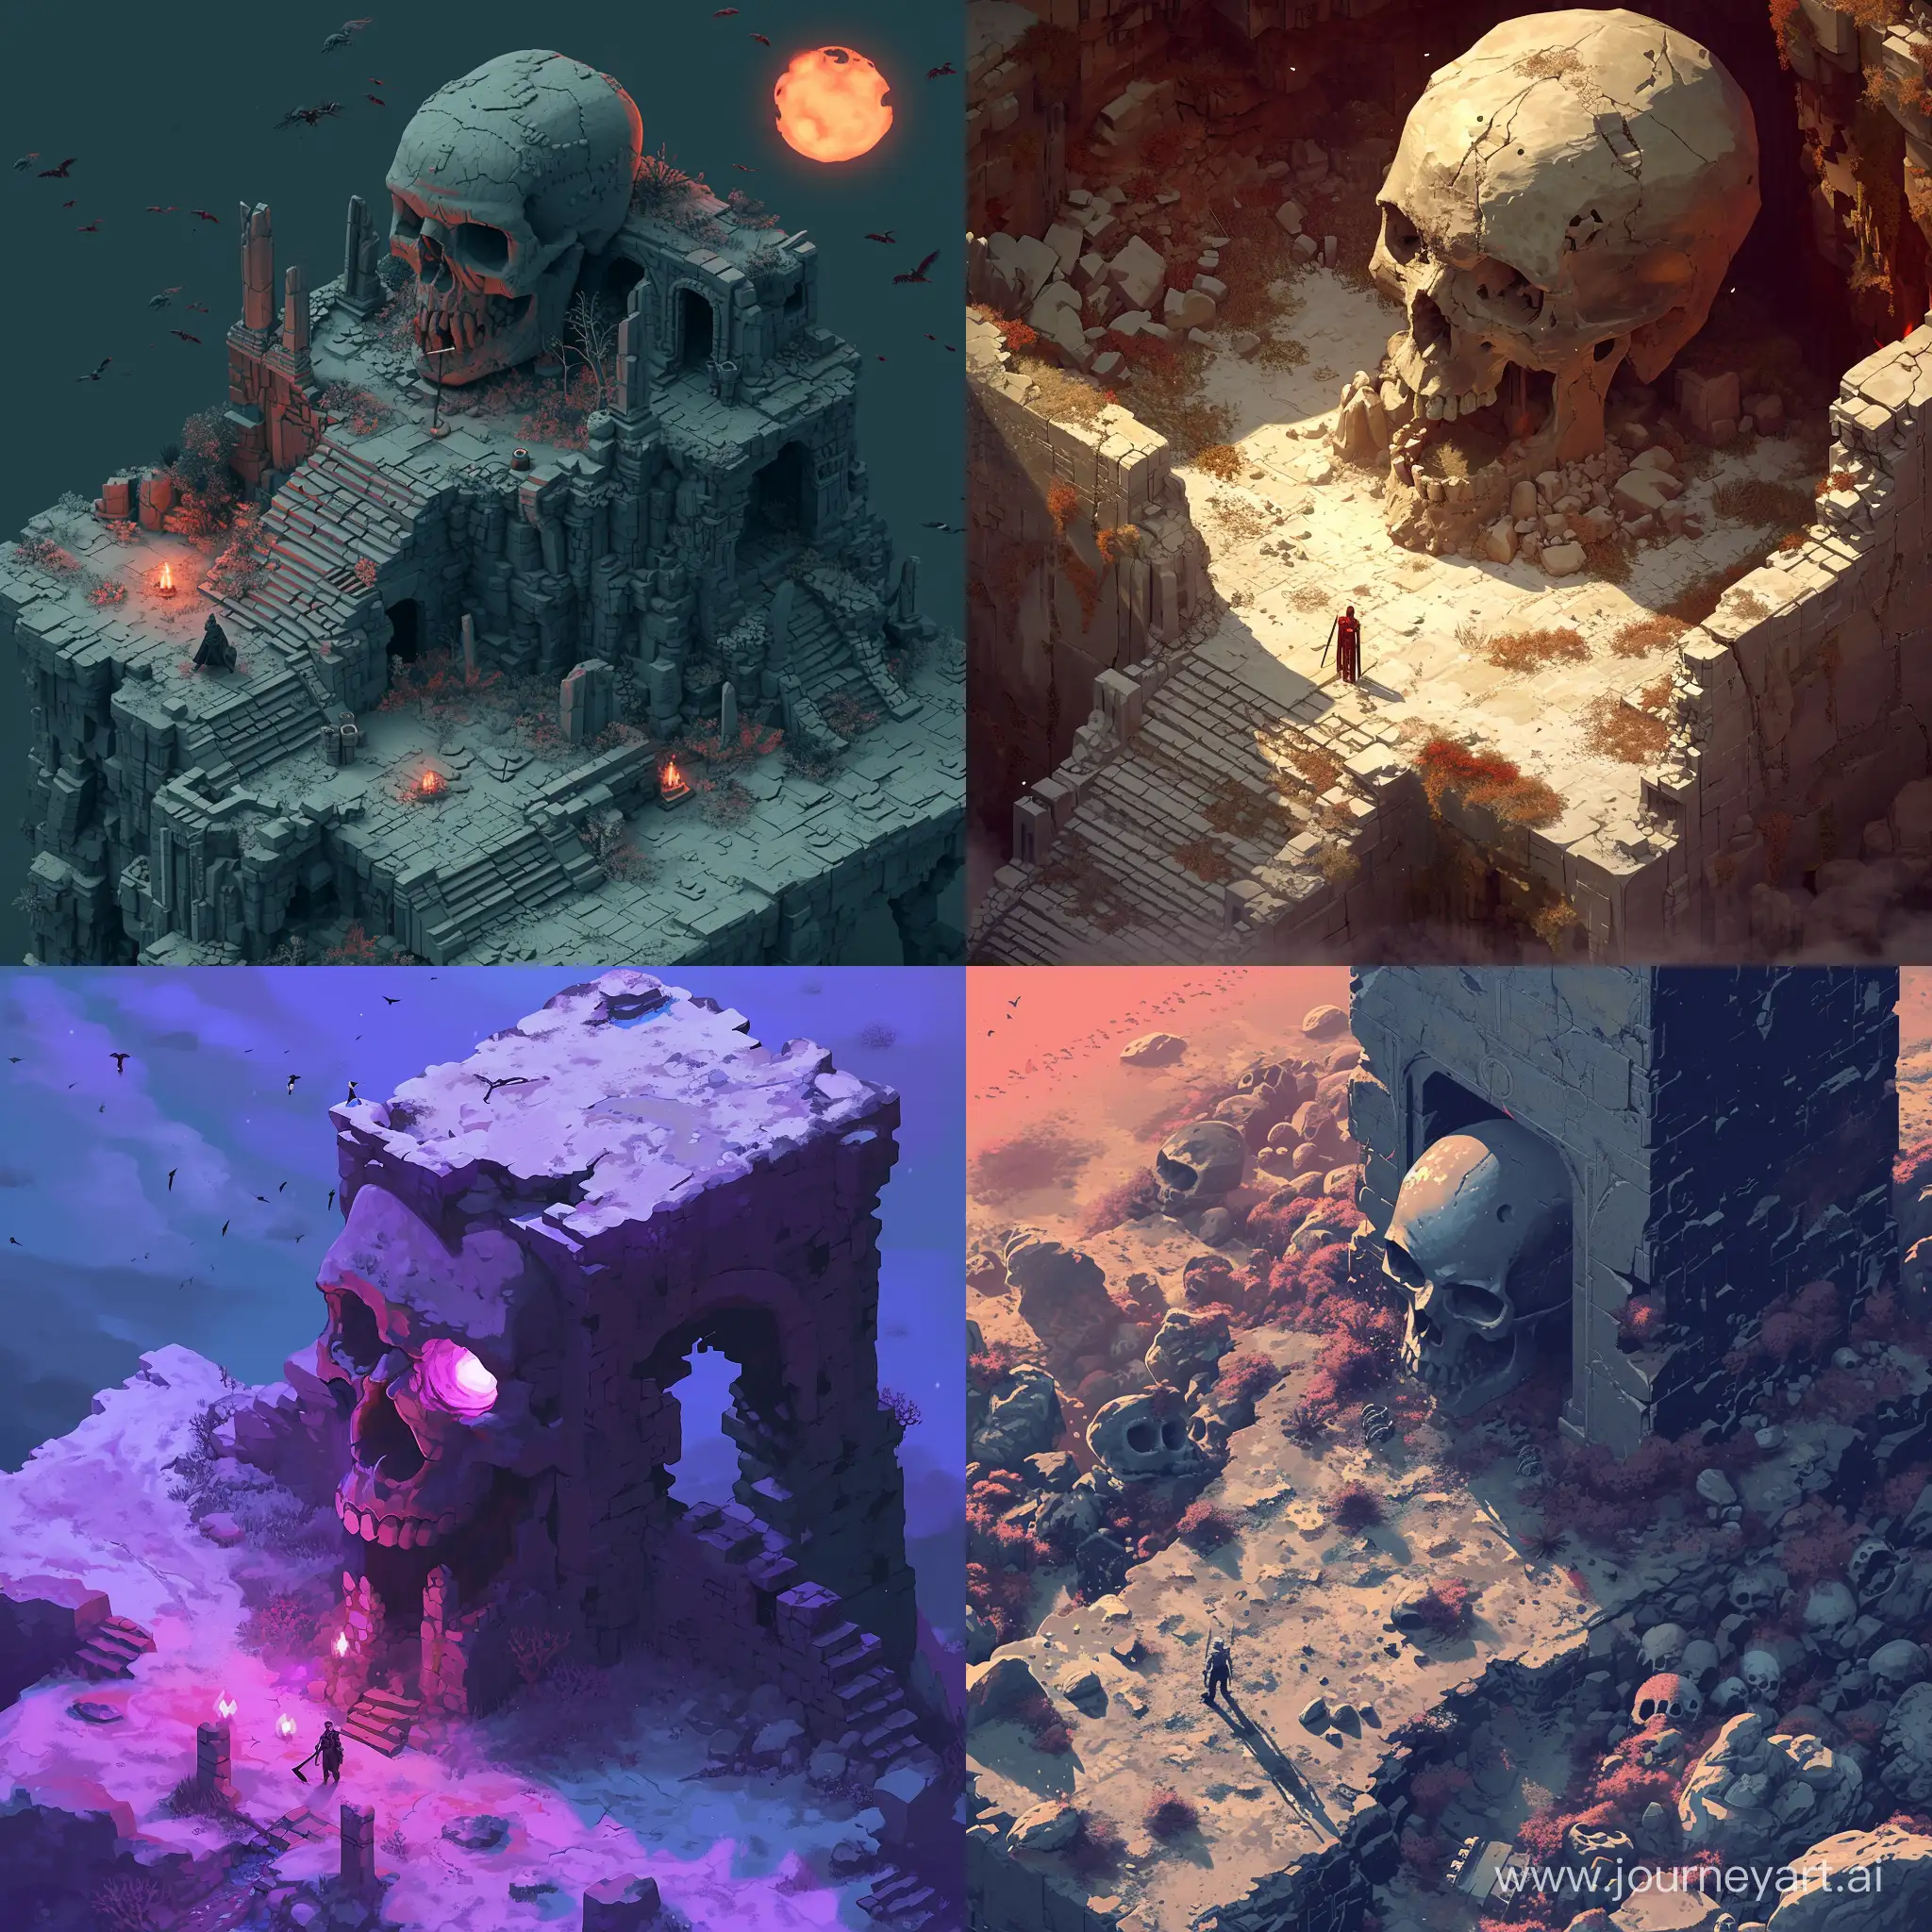 Warrior-Confronts-Giant-Skull-in-Desolate-Land-at-Dusk